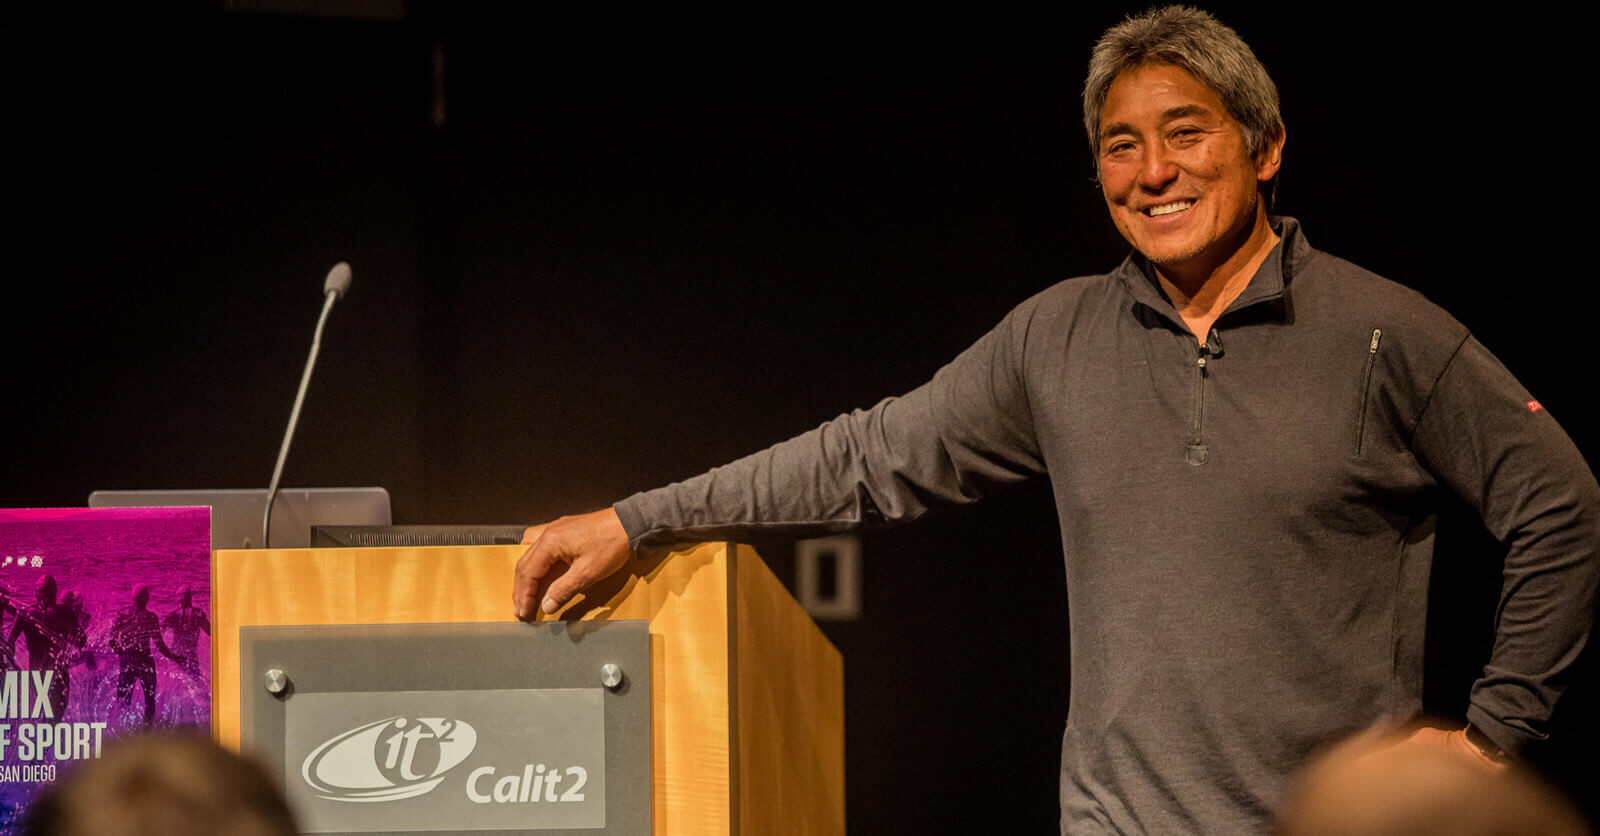 Guy Kawasaki giving the keynote at AttentionFWD 's Athlete Remix and the Future of Sports conference